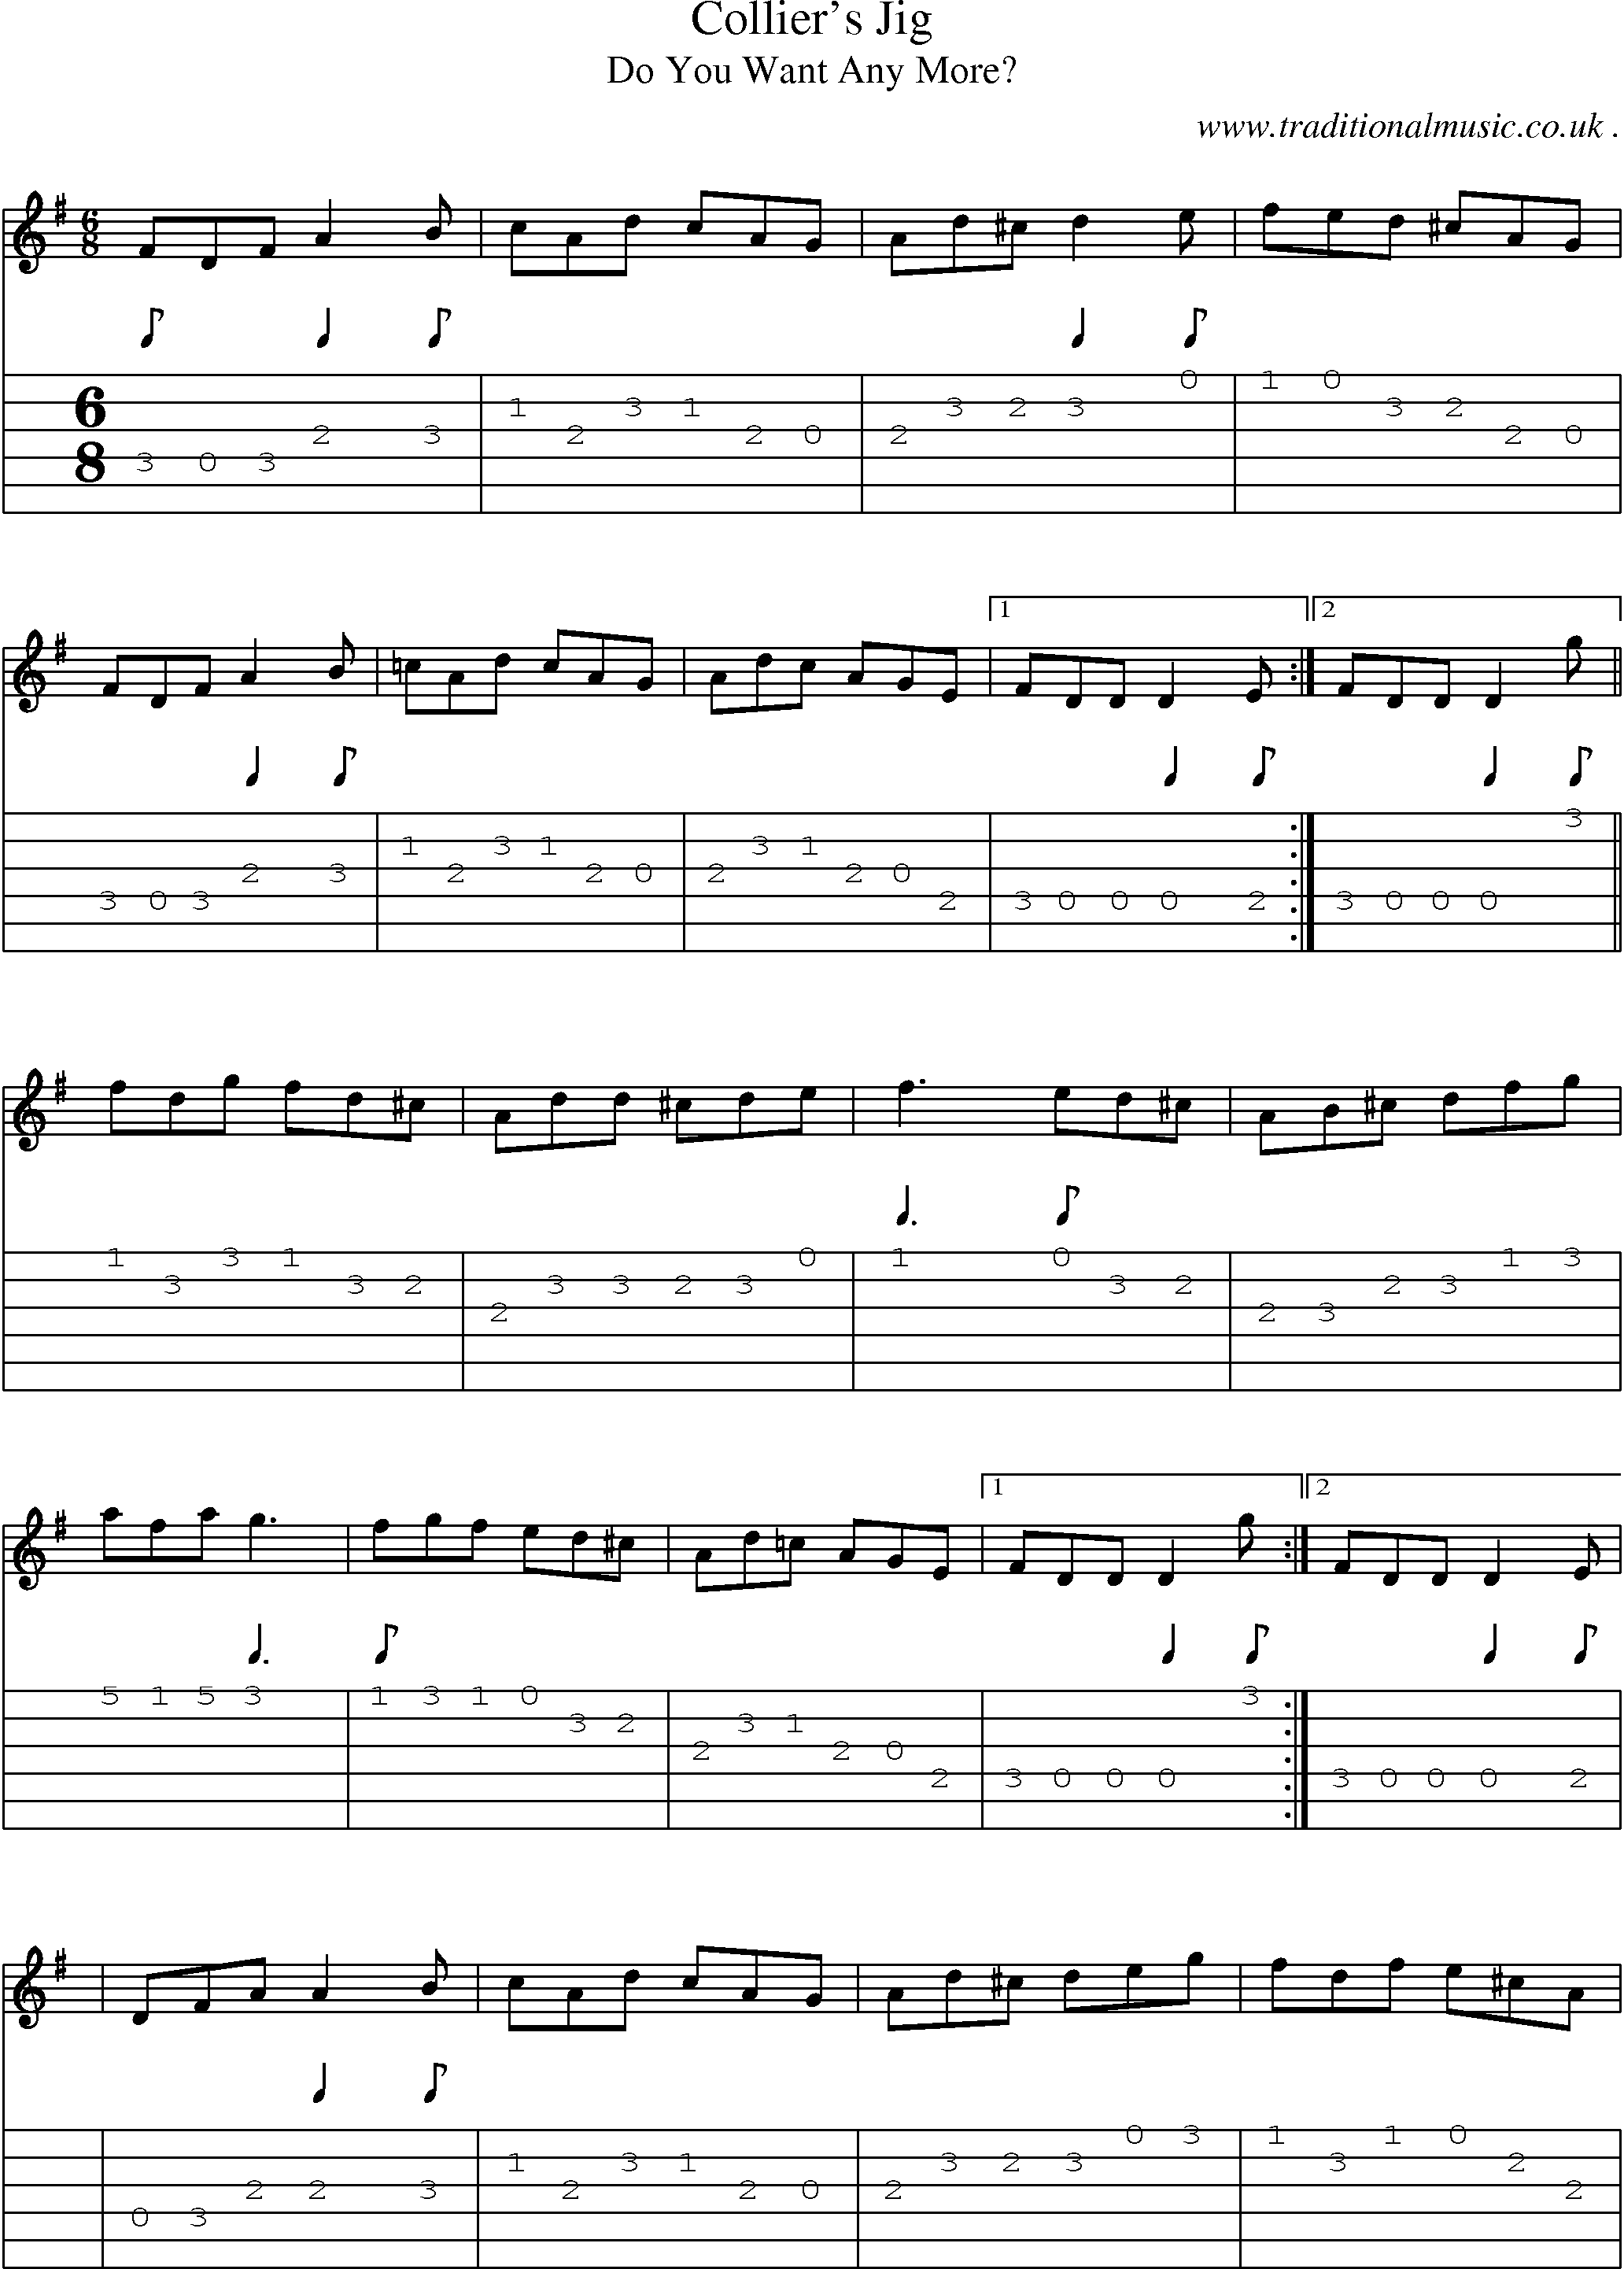 Sheet-Music and Guitar Tabs for Colliers Jig